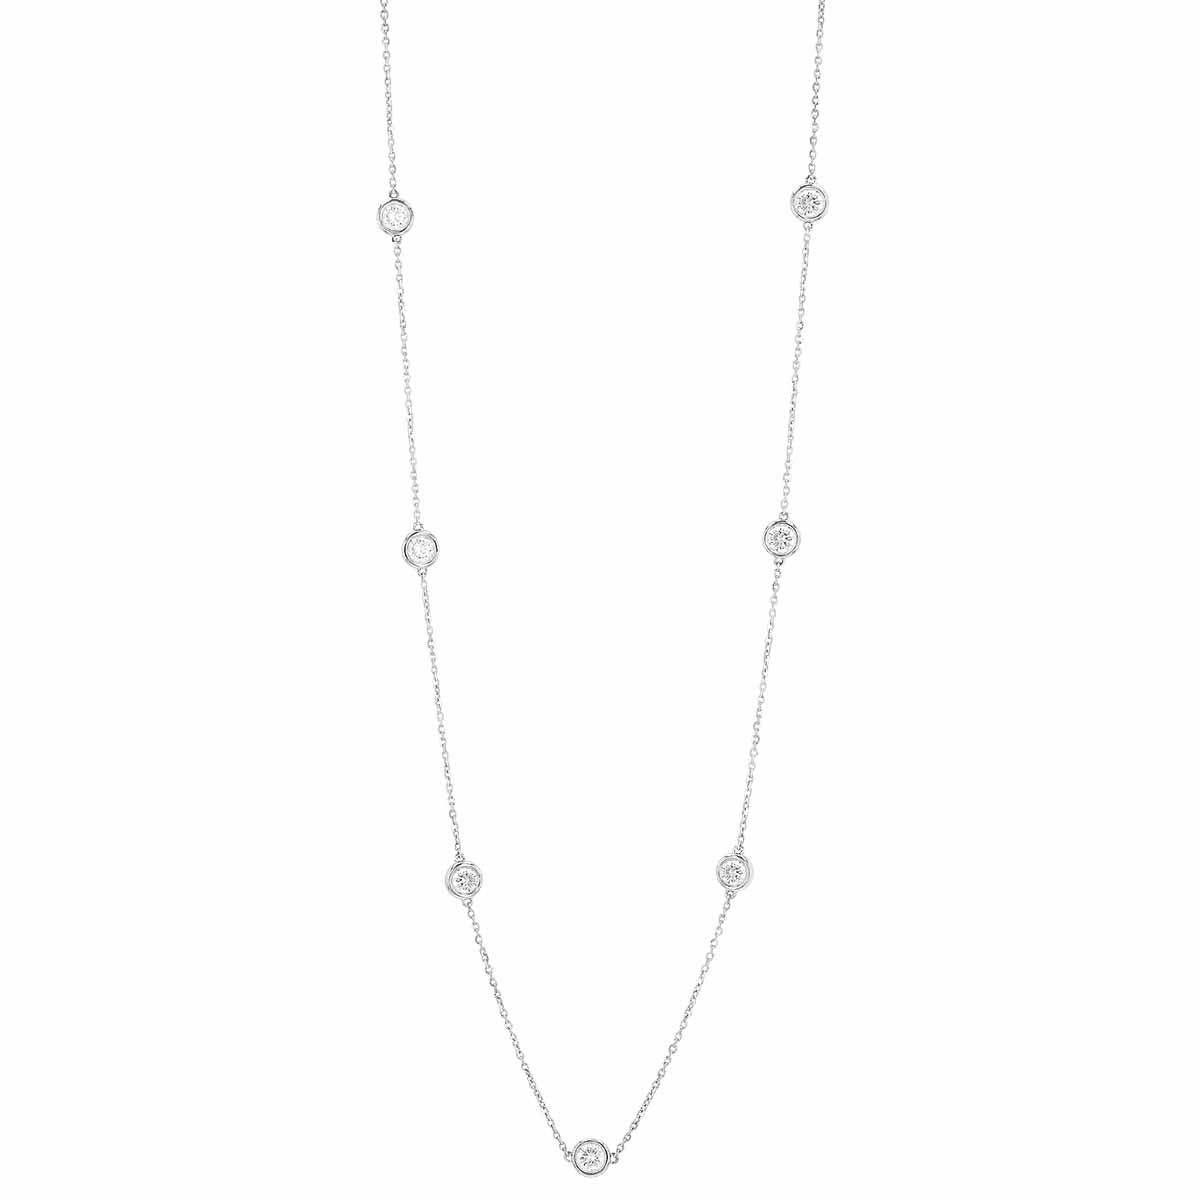 Borsheims Signature Collection Lab-Grown Diamond 7 Station Necklace in ...